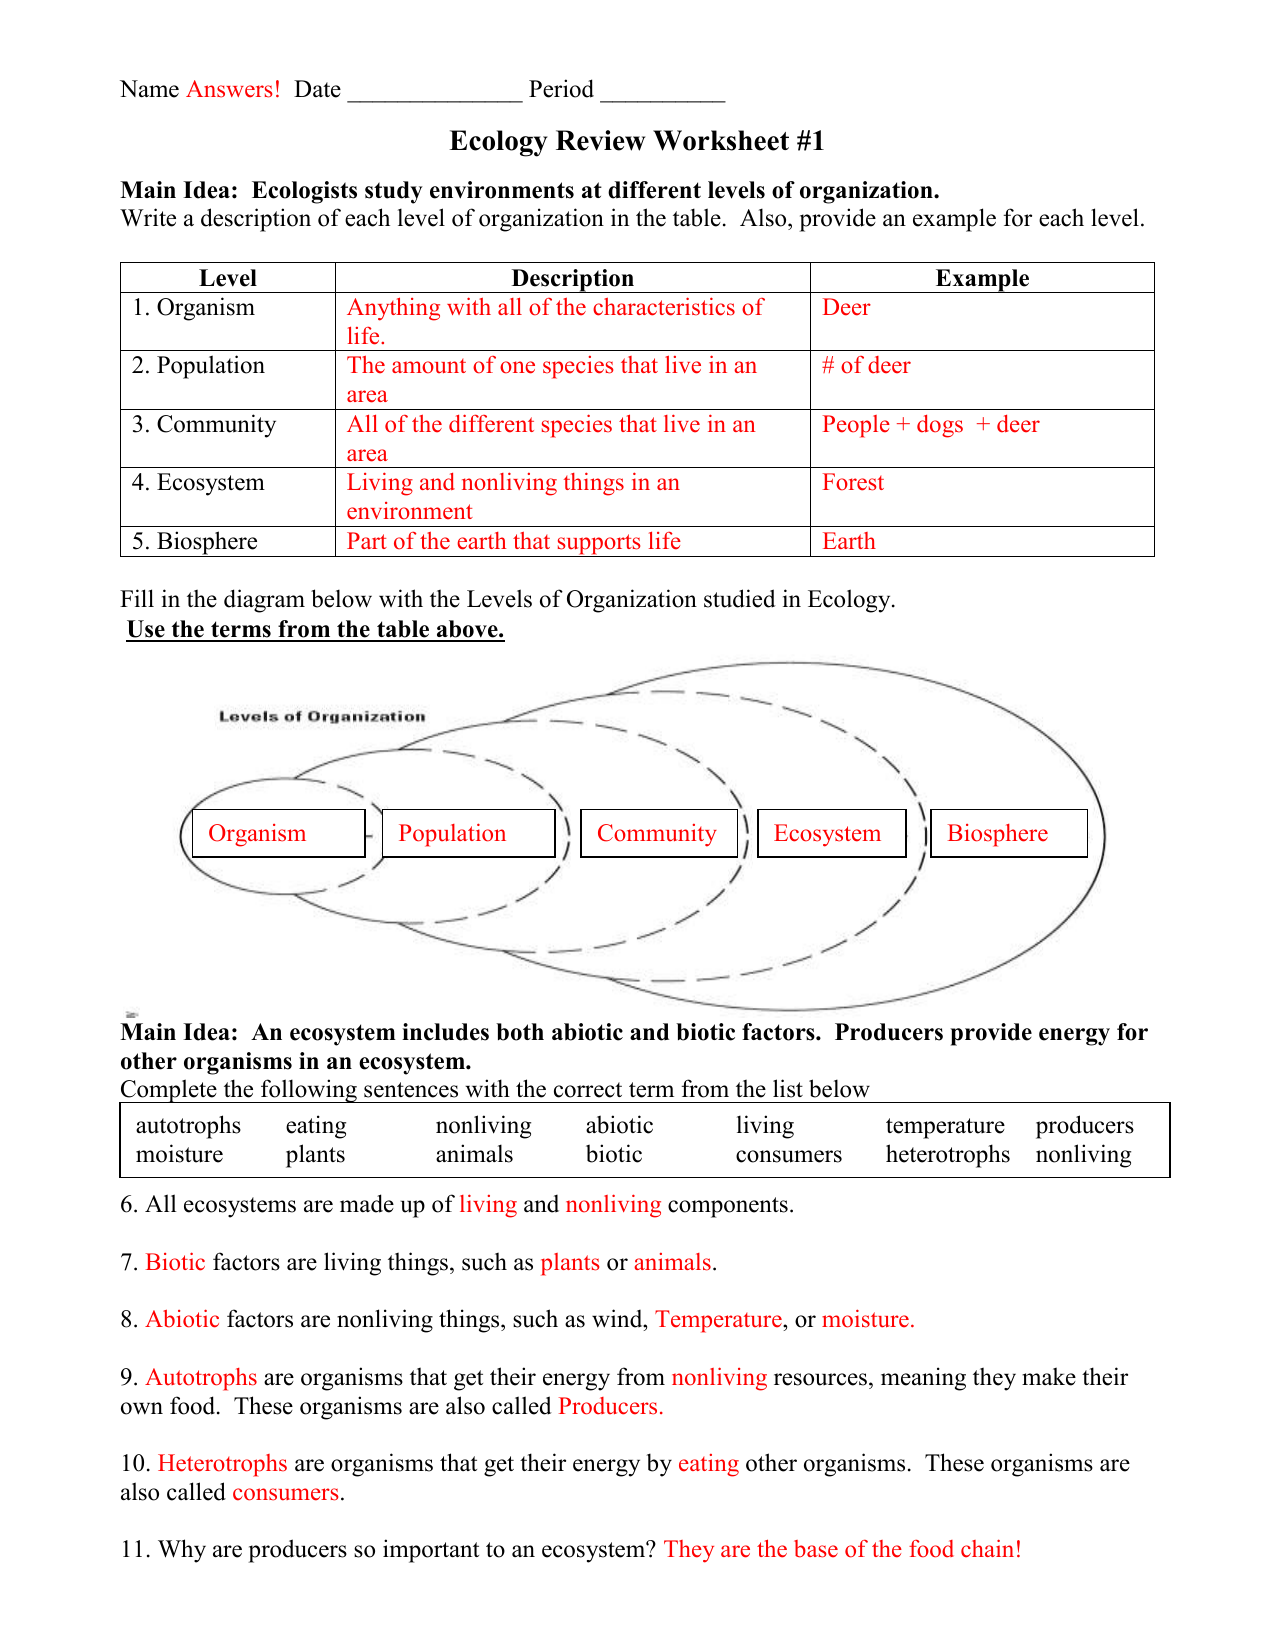 ecology-review-worksheet-11-answers Throughout Ecology Review Worksheet 1